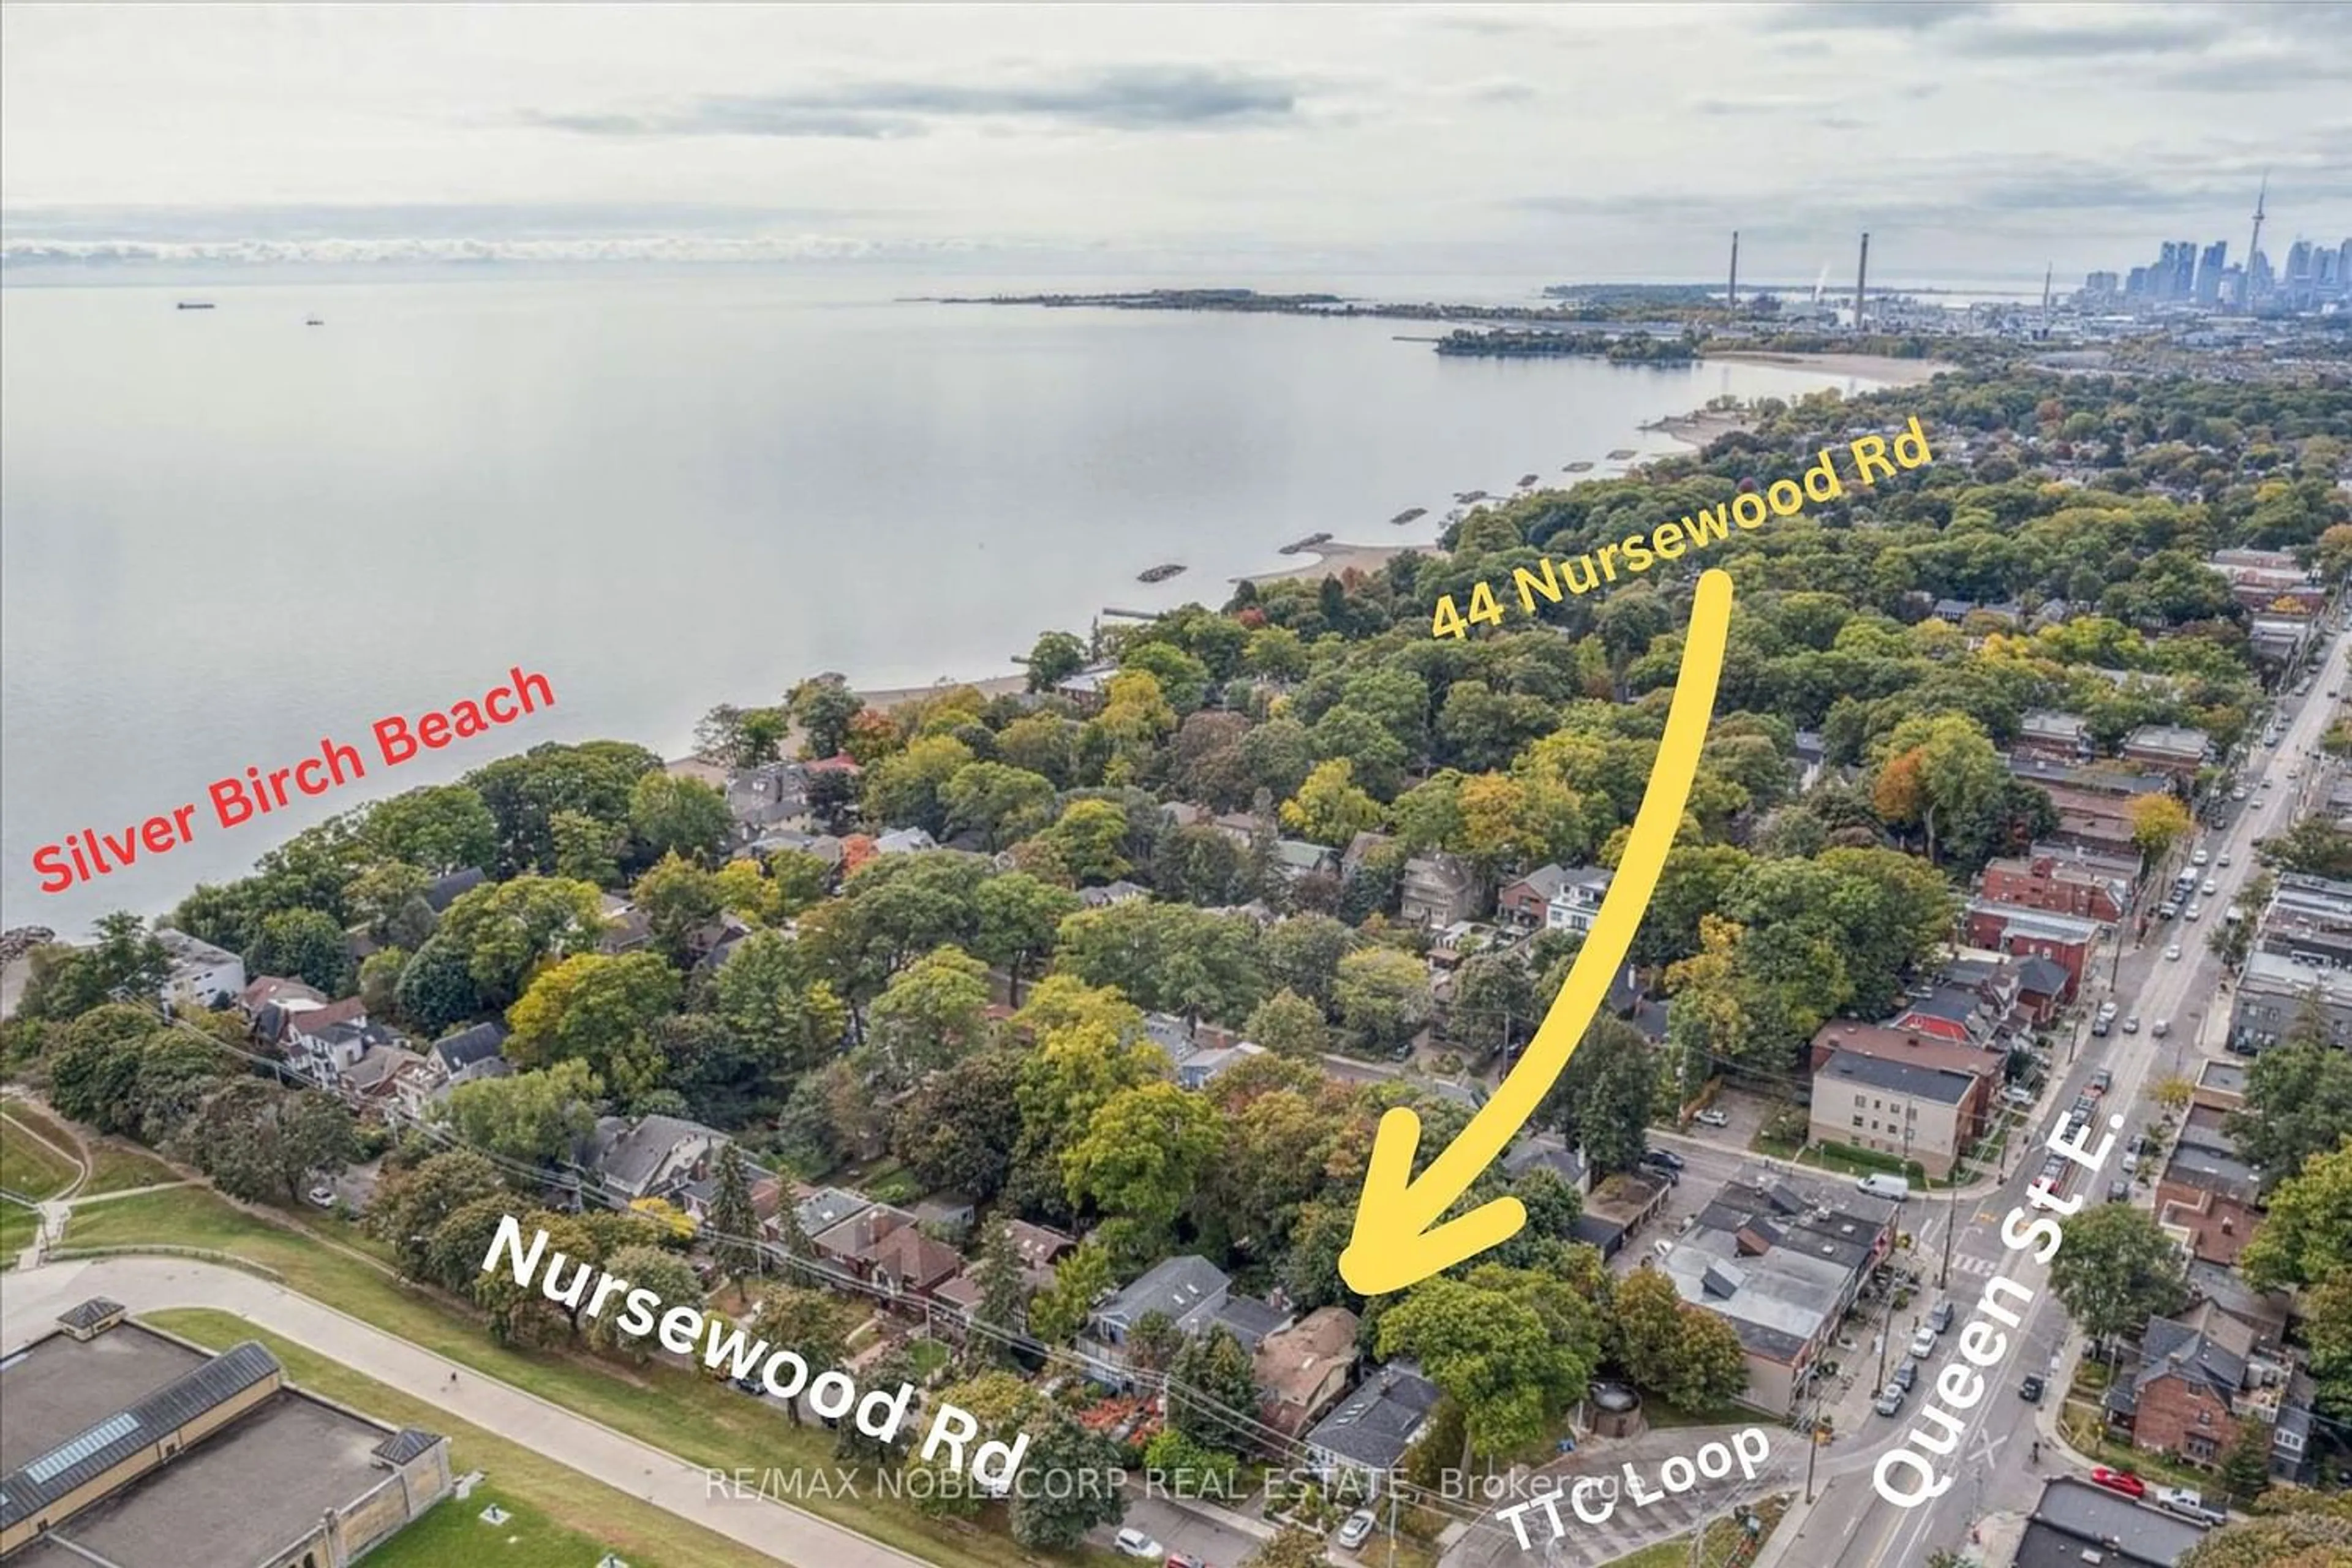 Home with unknown exterior material for 44 Nursewood Rd, Toronto Ontario M4E 3R8